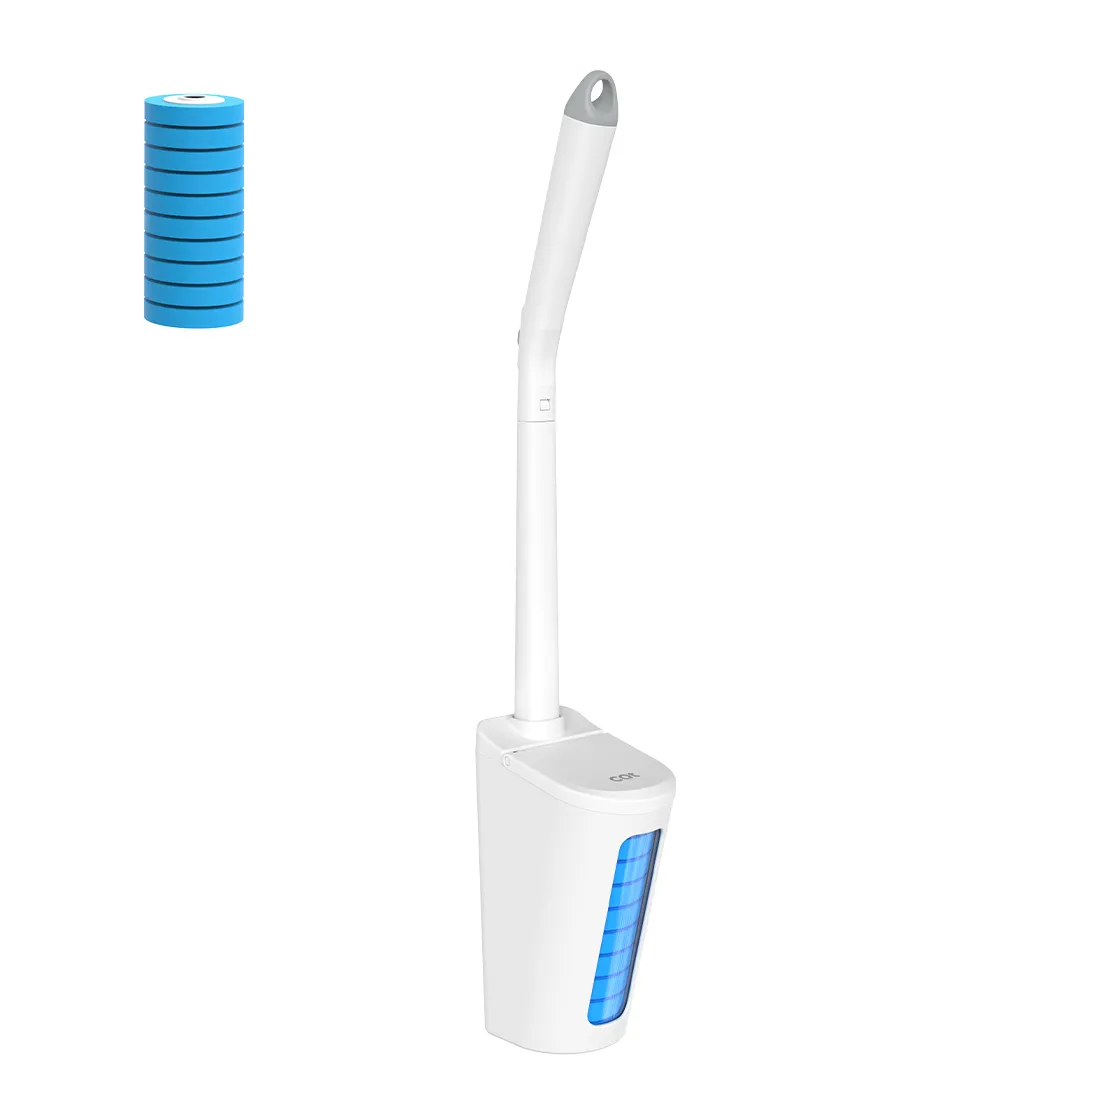 High Quality Bathroom Toilet Cleaning Brush With Disinfect Sponge Head Refills Disposable Toilet Brush Holder